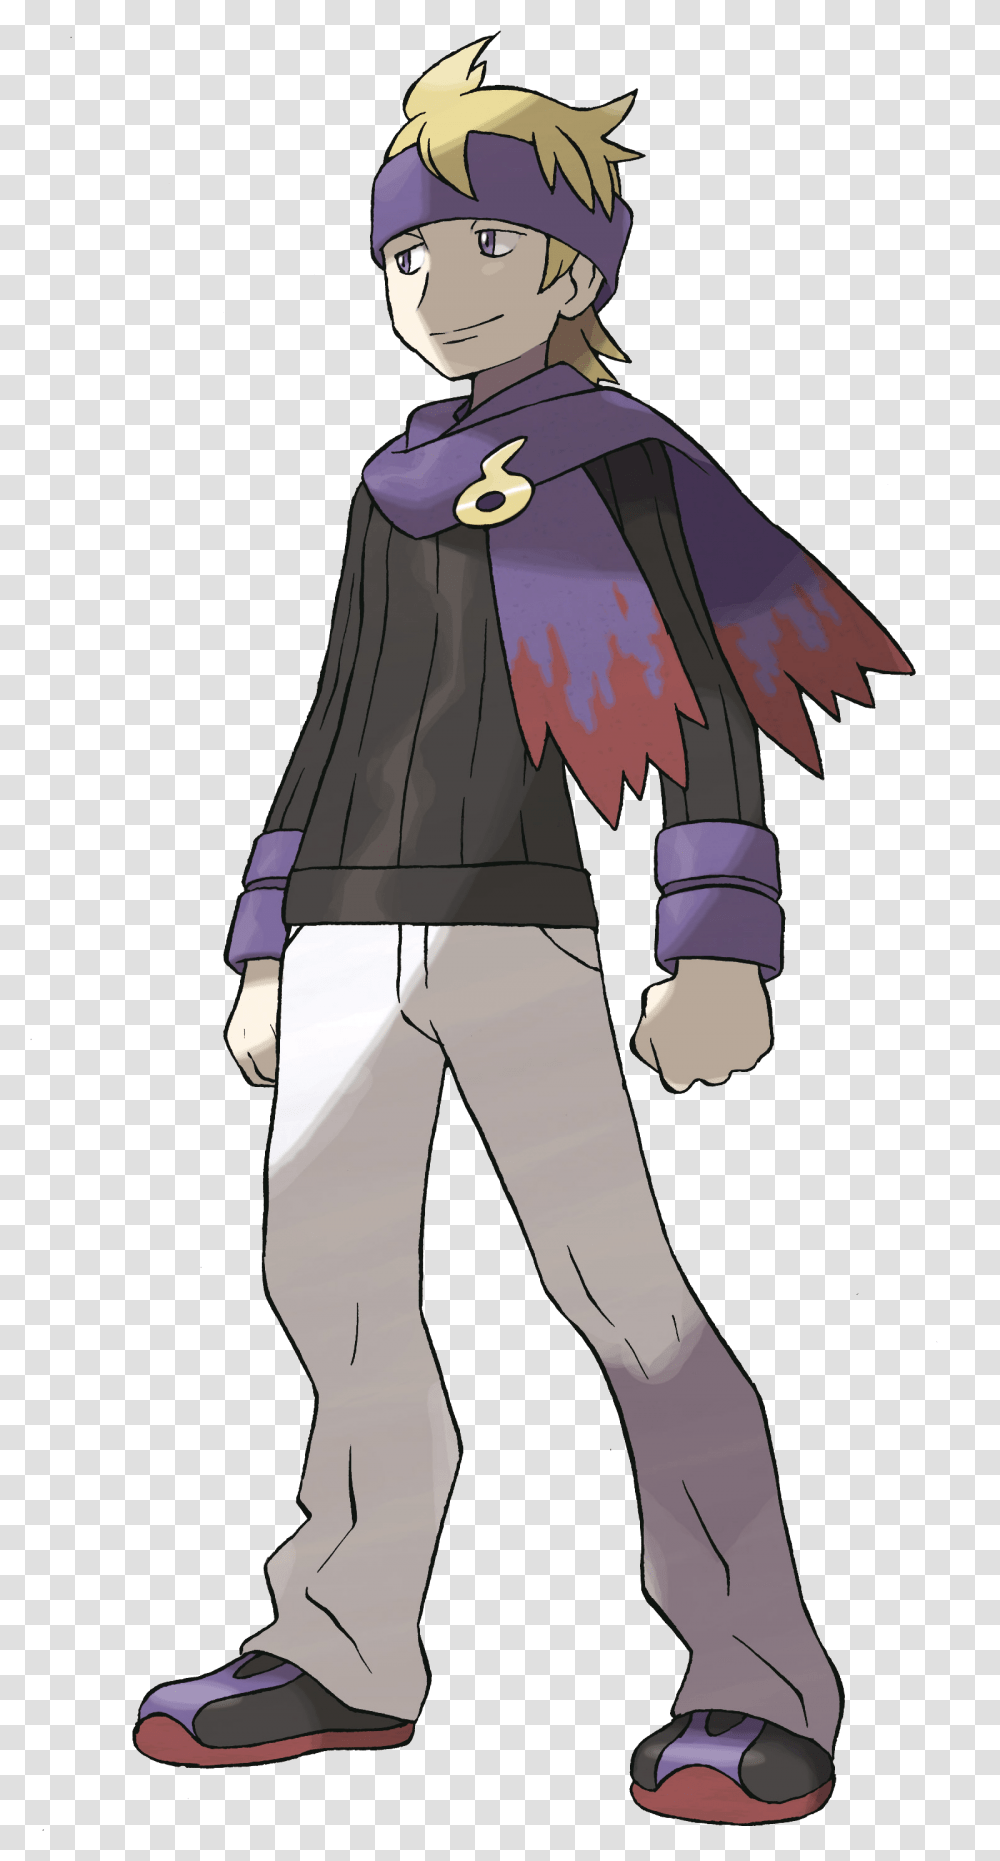 Download Hd Ace Weavile Quote Ice Is Morty Pokemon, Clothing, Manga, Comics, Book Transparent Png